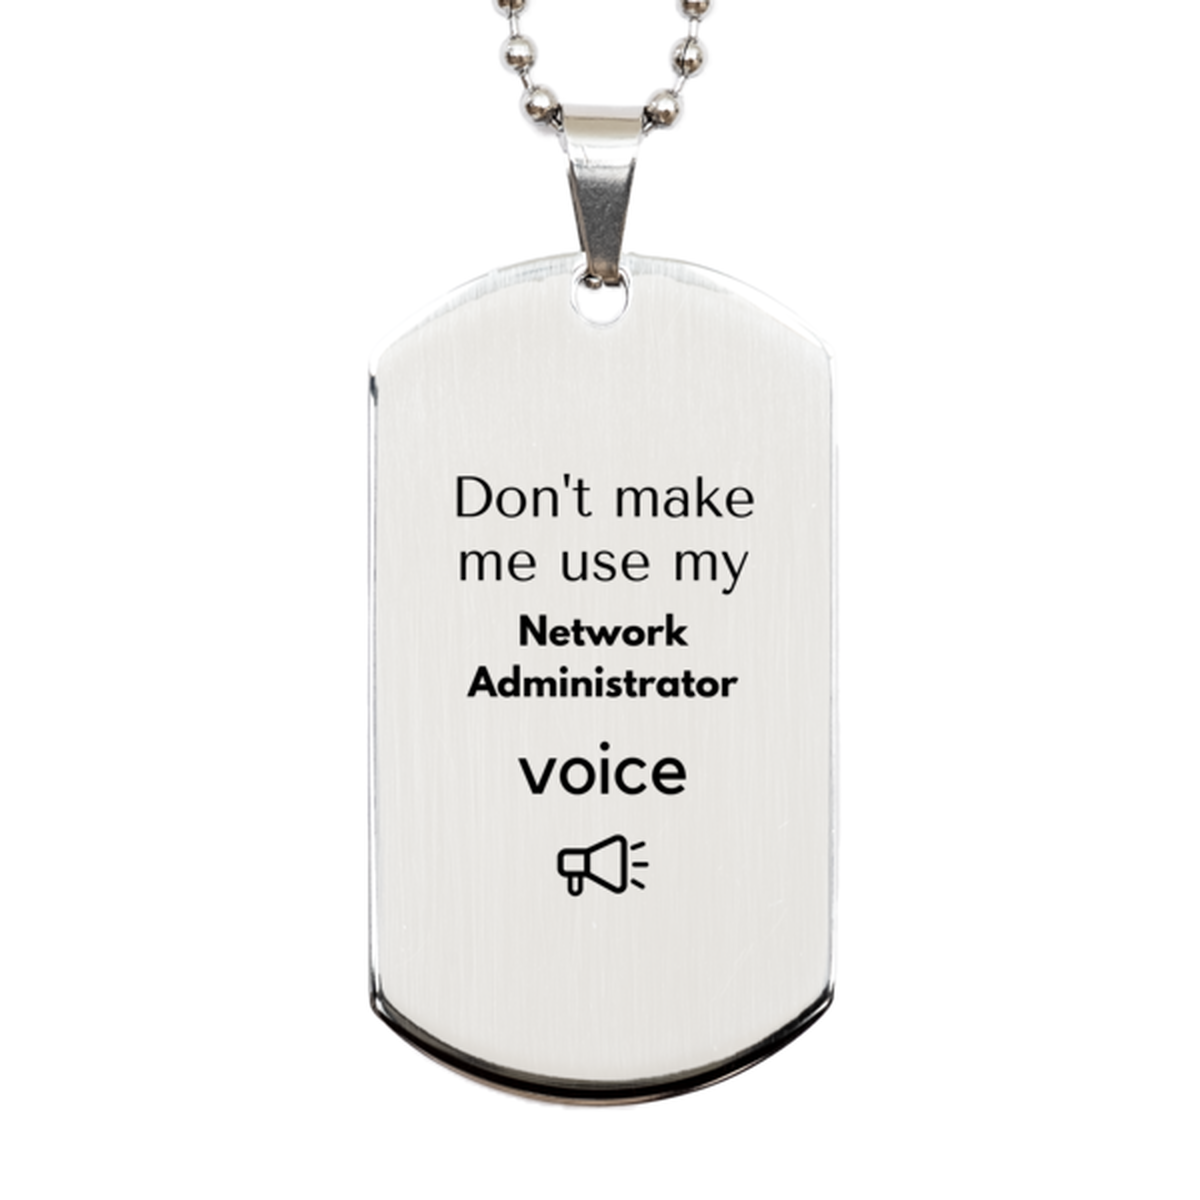 Don't make me use my Network Administrator voice, Sarcasm Network Administrator Gifts, Christmas Network Administrator Silver Dog Tag Birthday Unique Gifts For Network Administrator Coworkers, Men, Women, Colleague, Friends